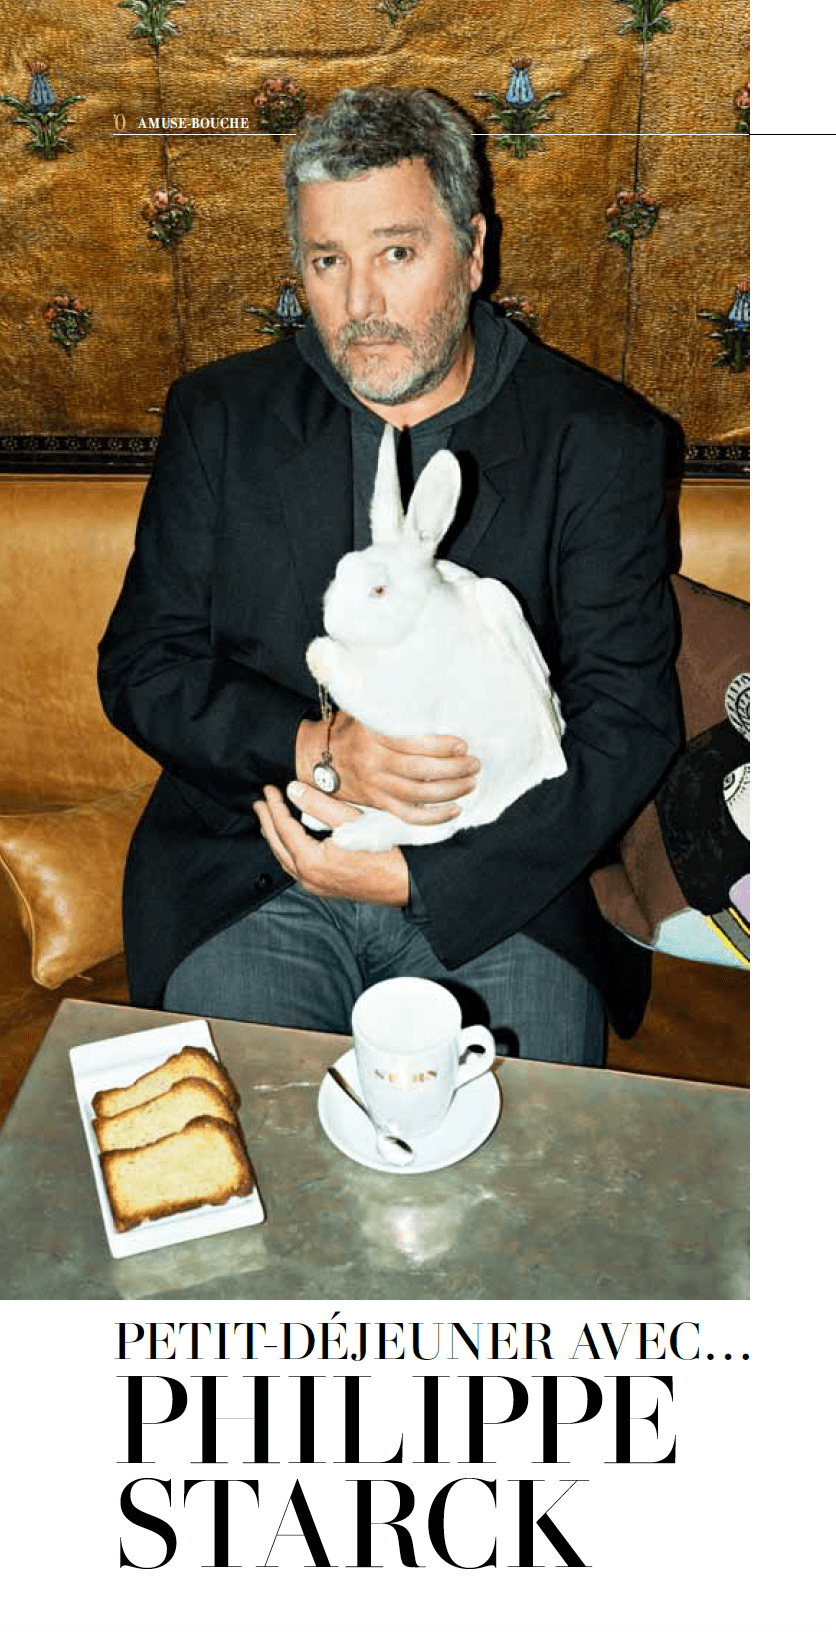 Breakfast with Philippe Starck